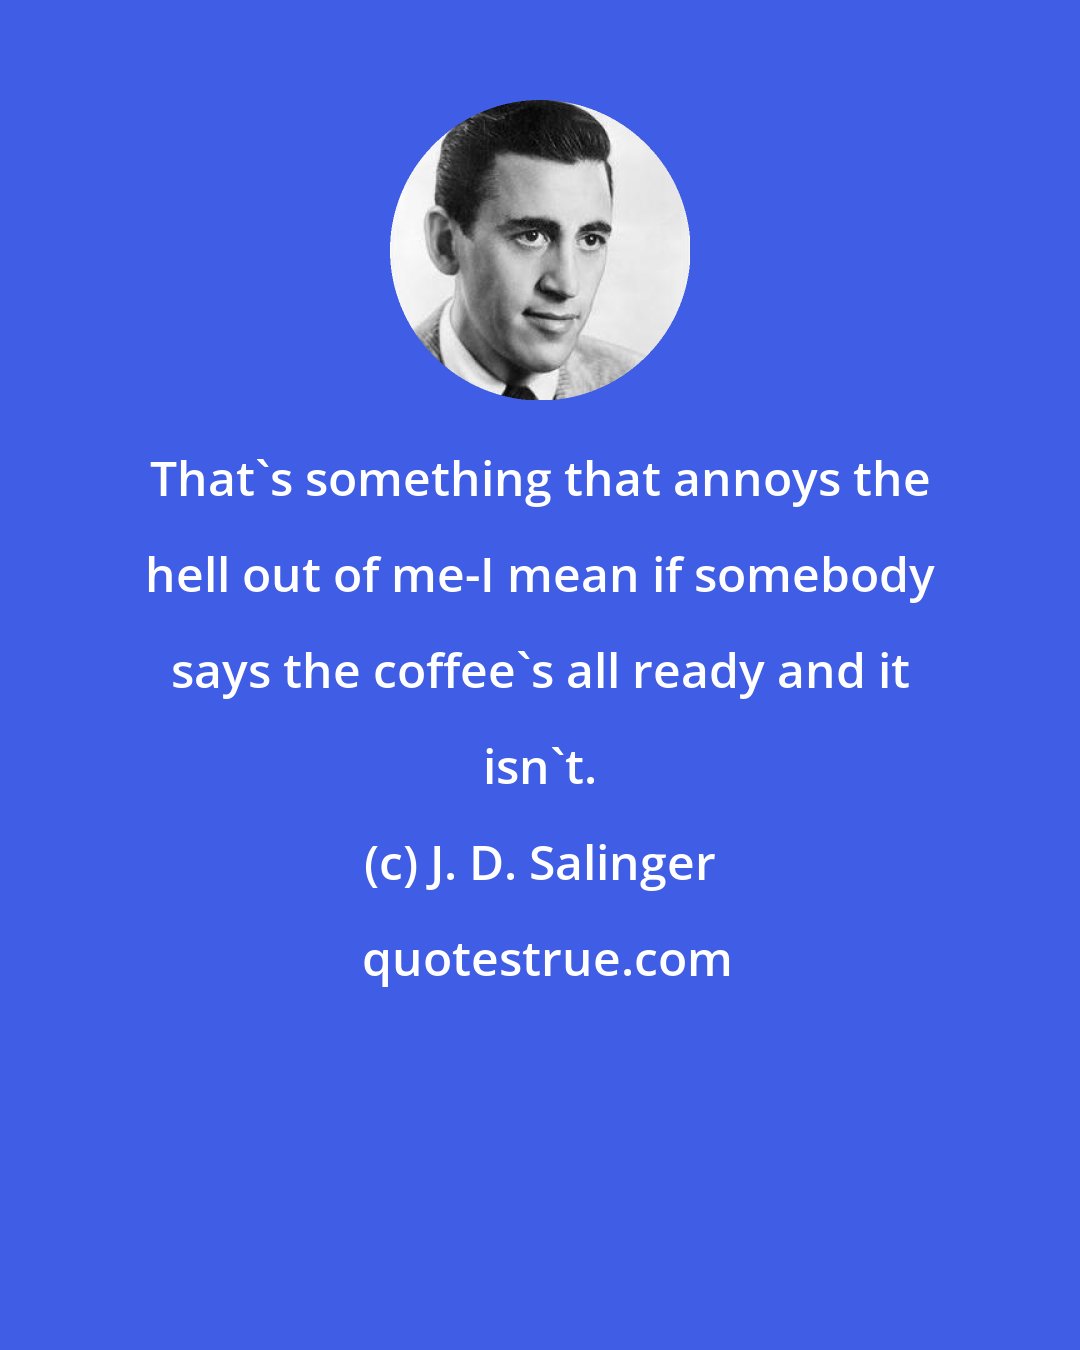 J. D. Salinger: That's something that annoys the hell out of me-I mean if somebody says the coffee's all ready and it isn't.